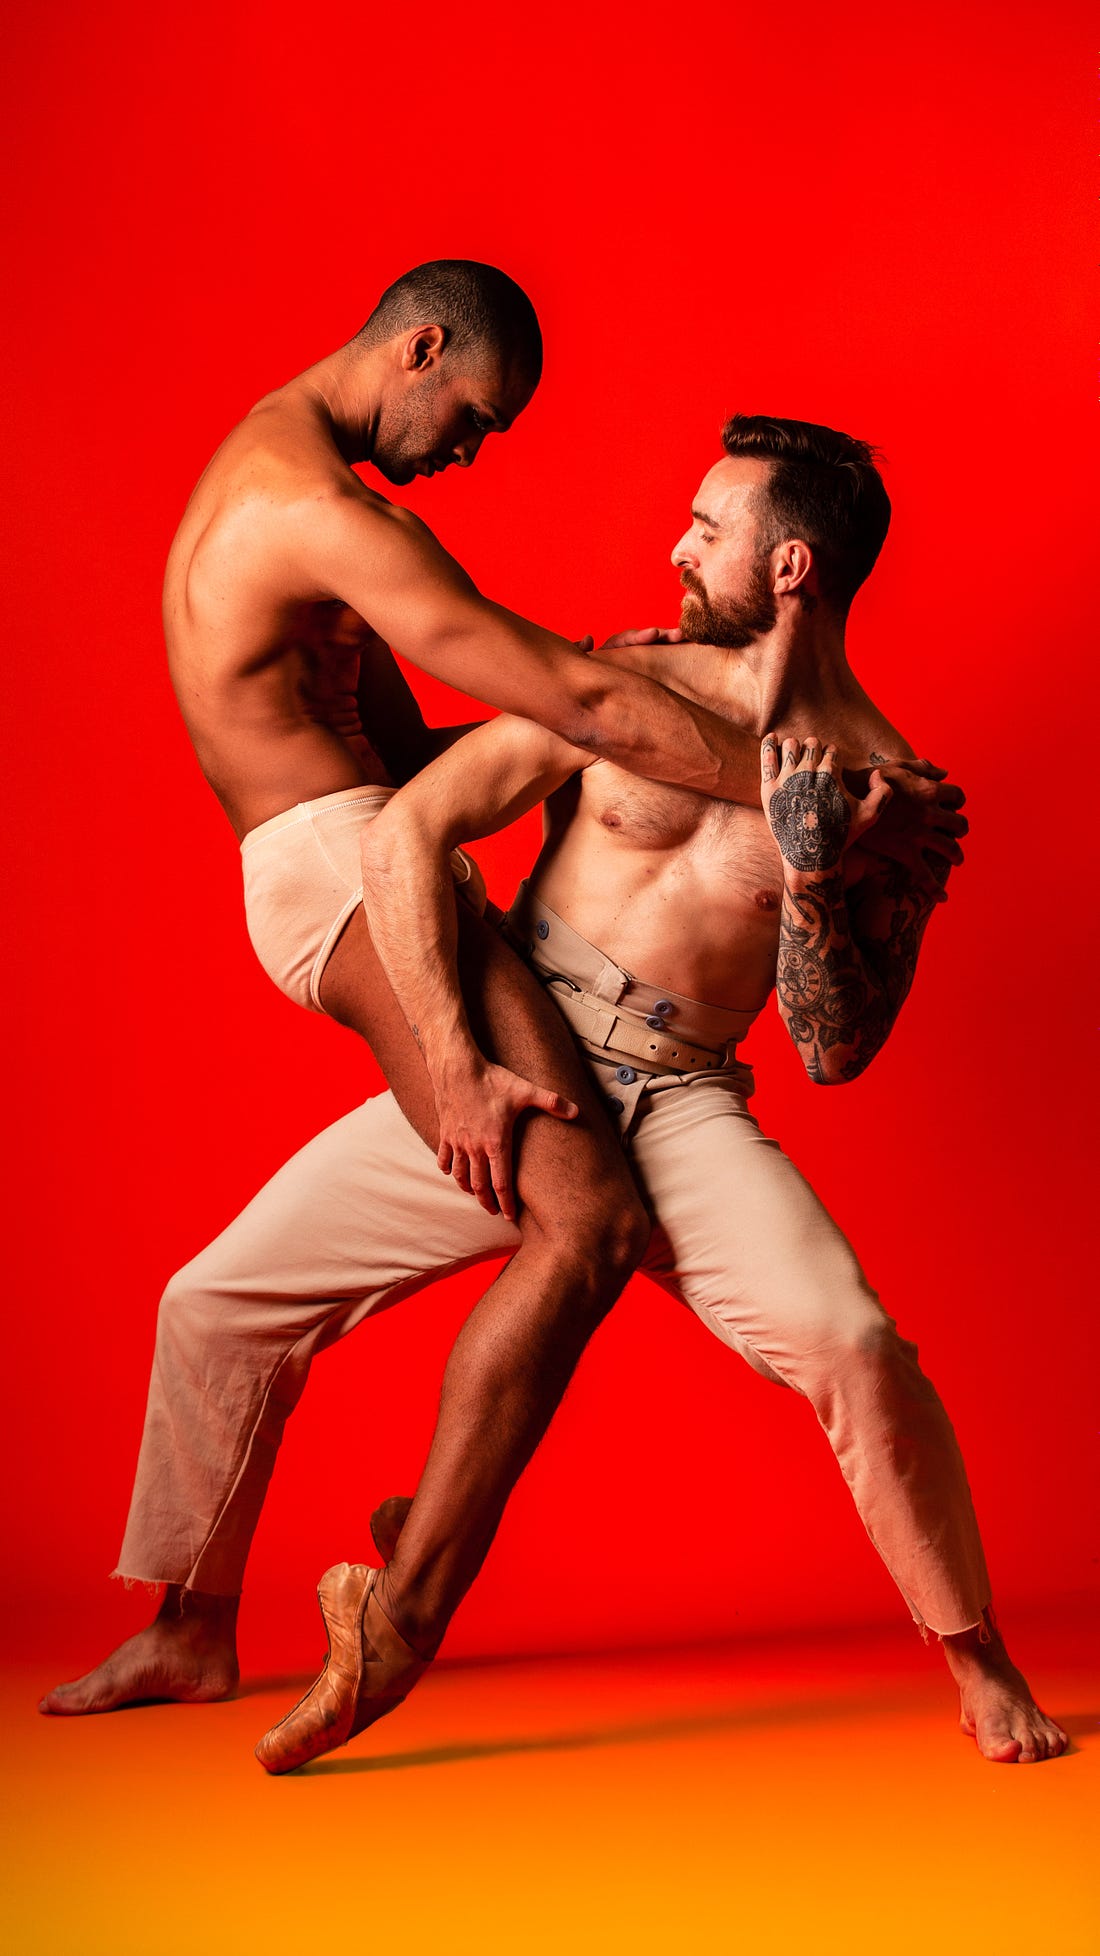 Two ripped male dancers embrace each other.